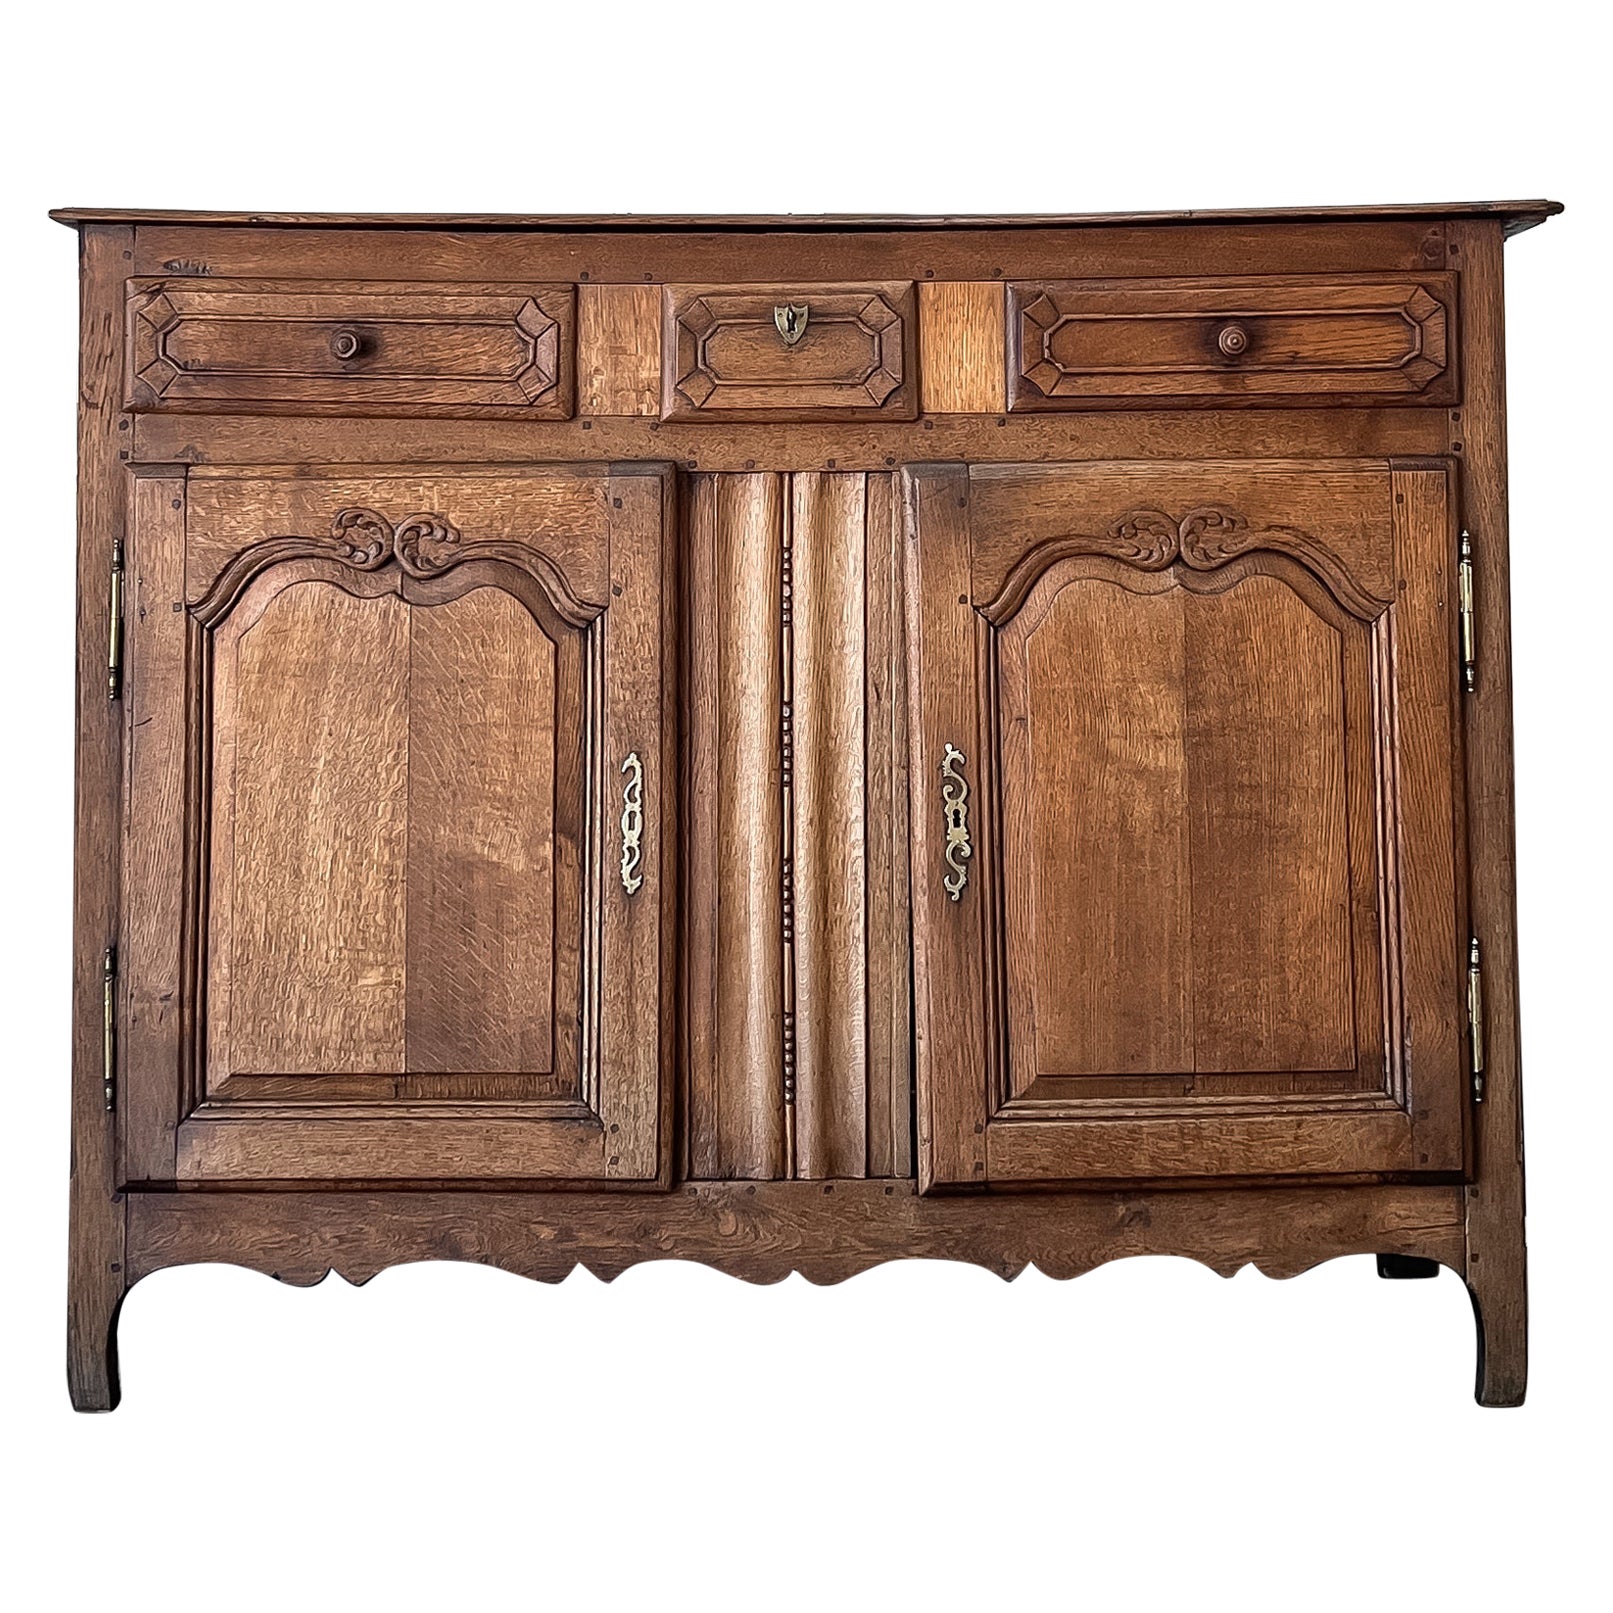 18th c. French Provincial Sideboard For Sale